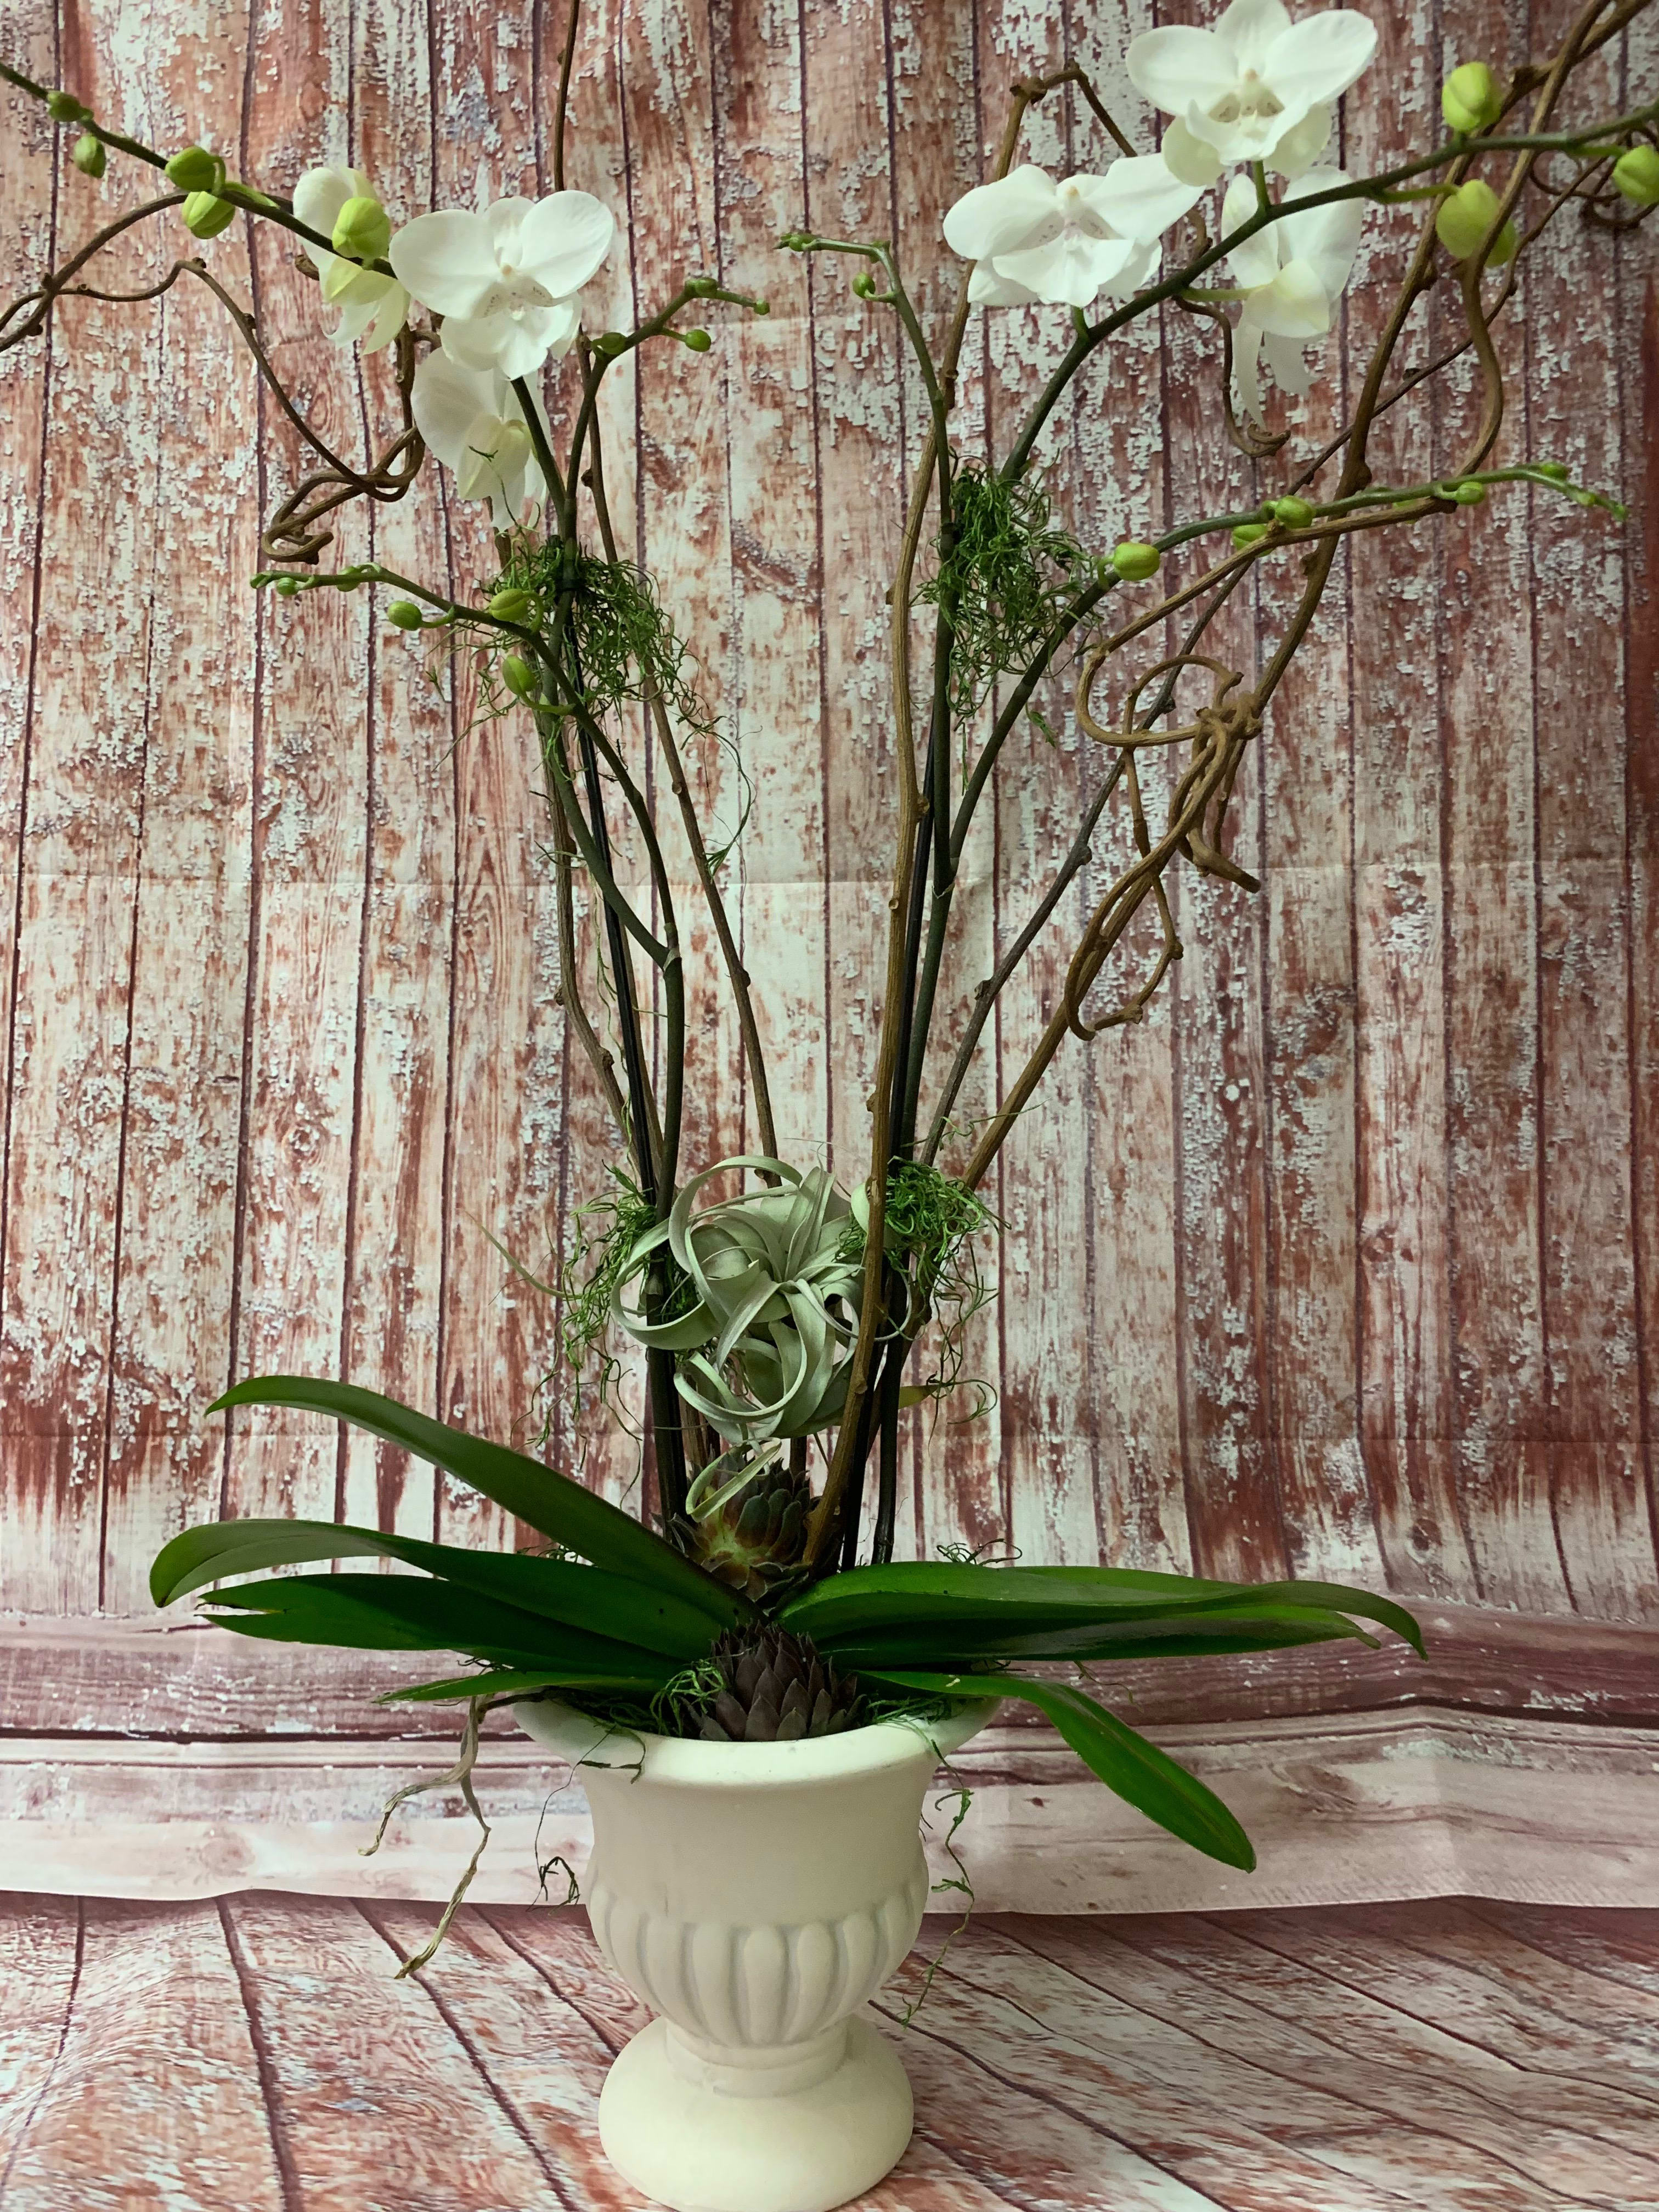 White Cascading Phalaenopsis Orchid Plant with Succulents - Symbolizing love, refinement, strength and rare beauty, our live Phaelaenopsis Orchid plant arrives in a ceramic pot accented with succulents and/or air plants, decorative branches, and moss. Please note that pots will vary depending on market availability.  *Orchid plants typically remain in bloom for about one month with proper care. *Each plant arrangement is unique &amp; vessels and design style may vary slightly.  LIGHT Medium to Bright Indirect Light  SOIL Well draining potting medium like fine-grade orchid bark or orchid mix  TEMPERATURE During the day they thrive in mild temperatures between 68-85°F. At night they will tolerate slightly cooler environments but the temperature needs to remain steady when in bloom. Chilly temperatures or drafty areas can cause flowers and buds to drop.  WATER Water once a week and allow potting mix to almost dry out between waterings. Do not let it stand in water. 